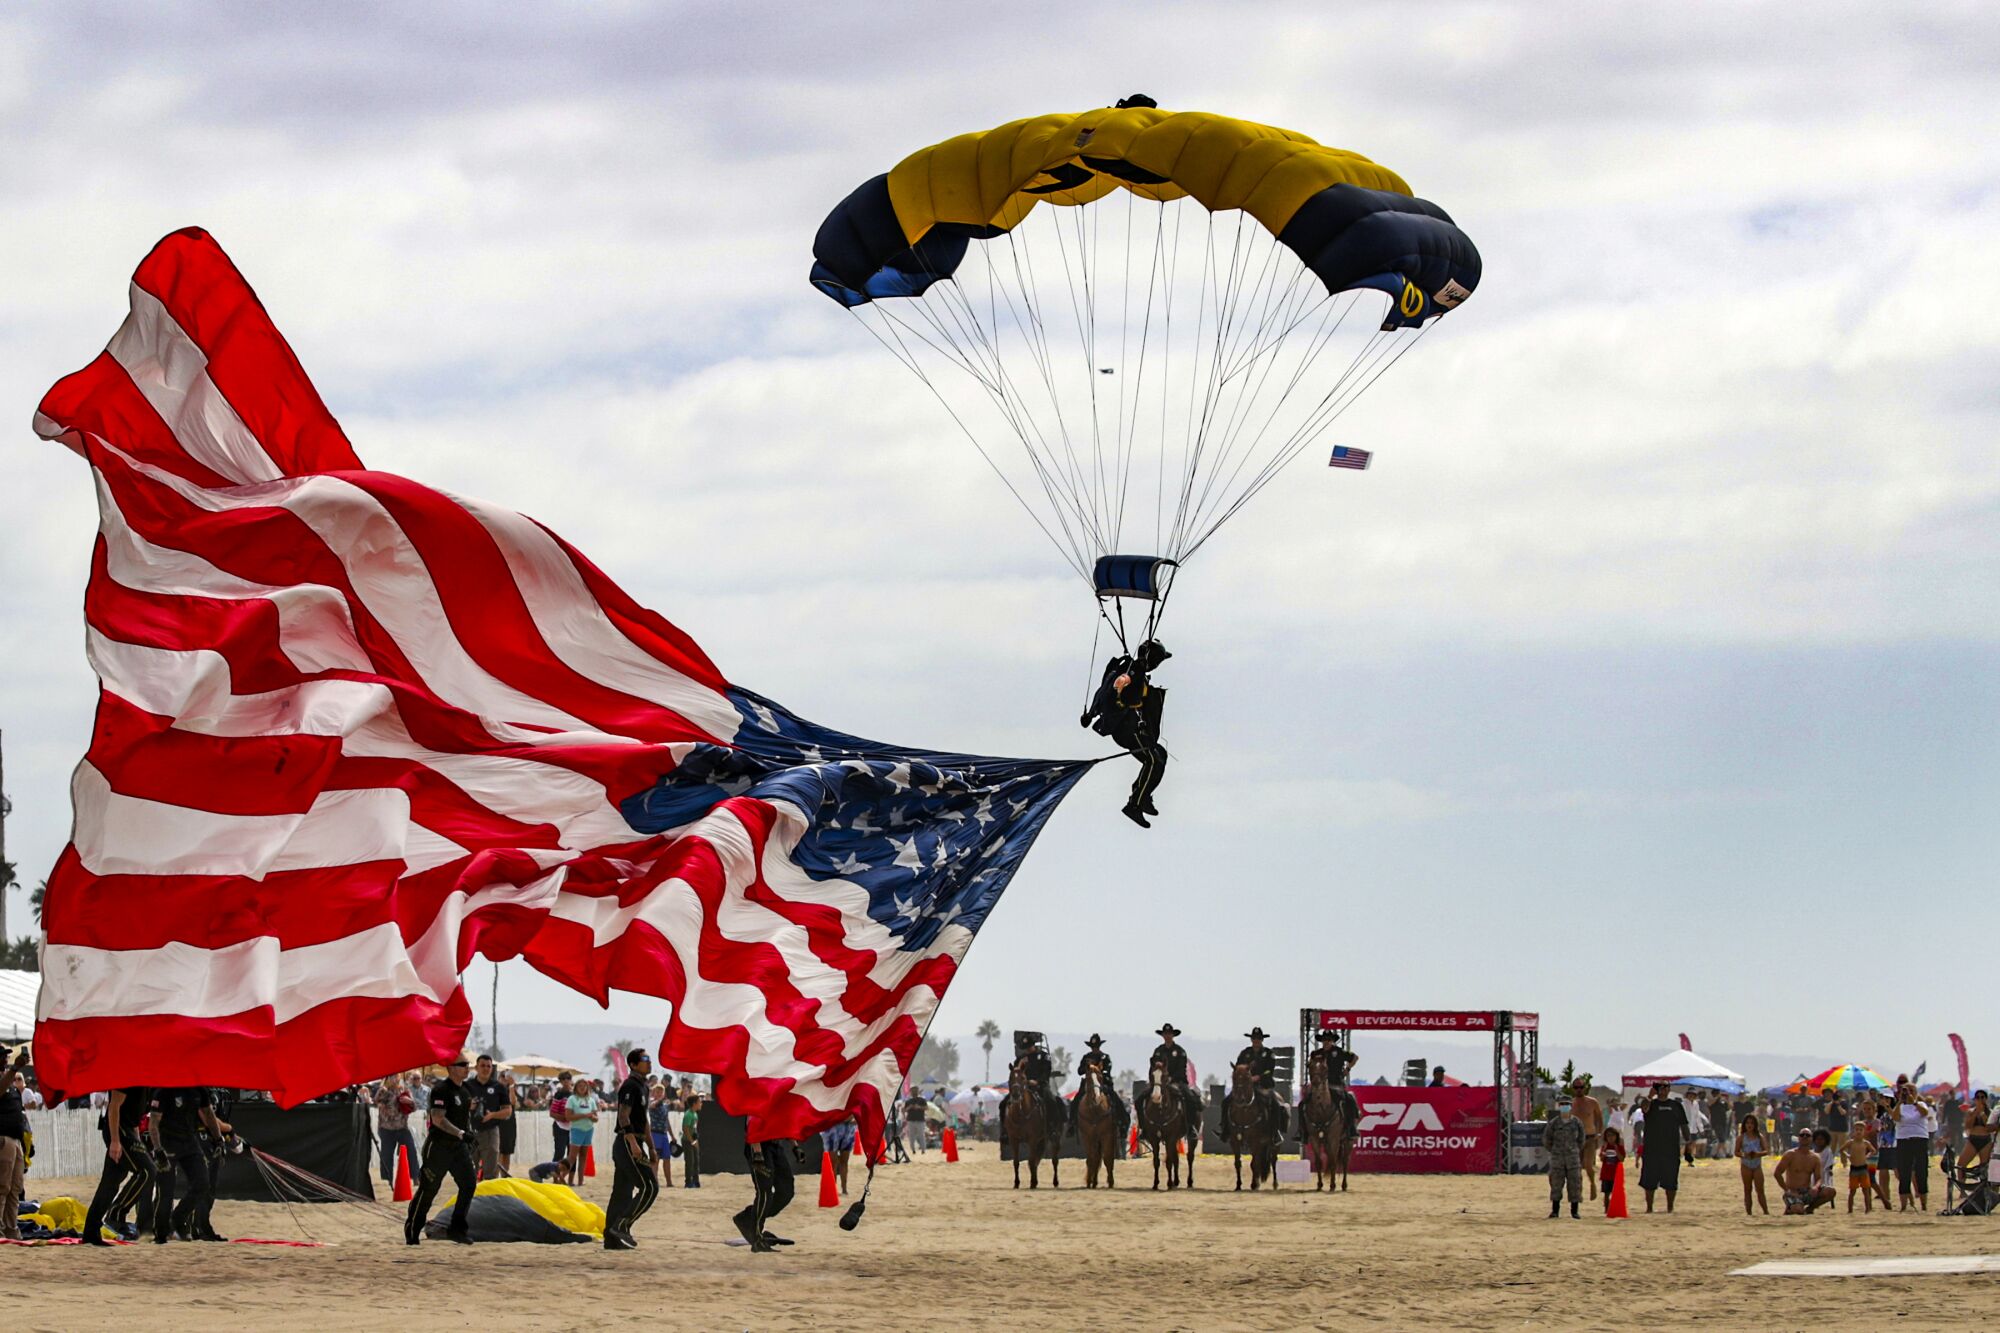 US Navy Leap Frogs perform parachute jumps during the Pacific Airshow